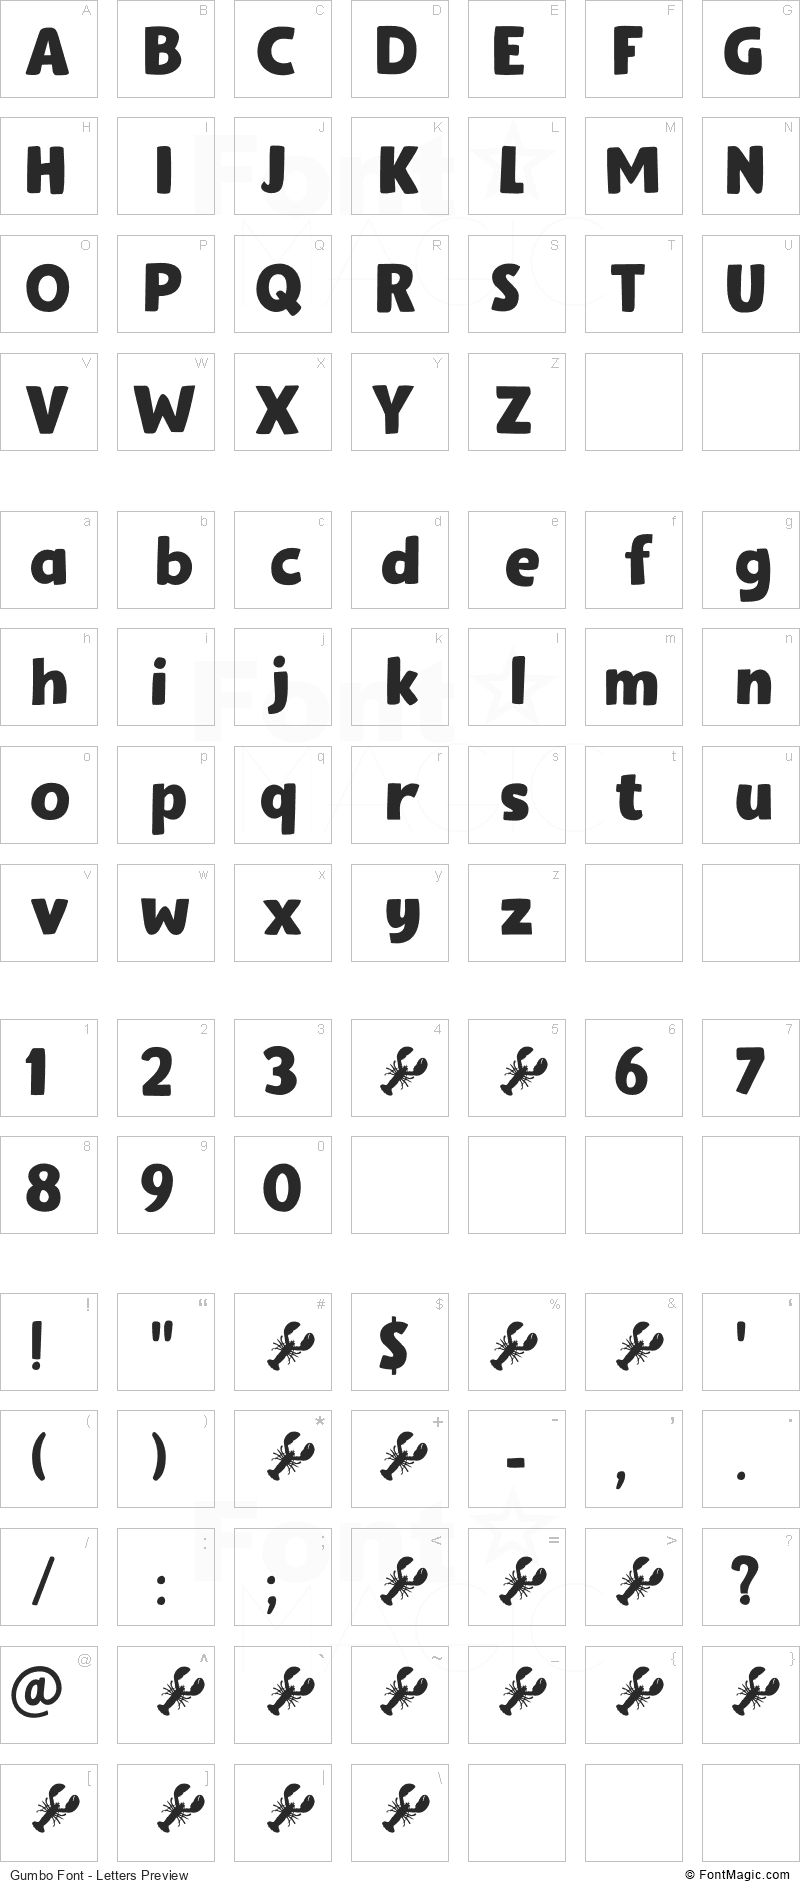 Gumbo Font - All Latters Preview Chart